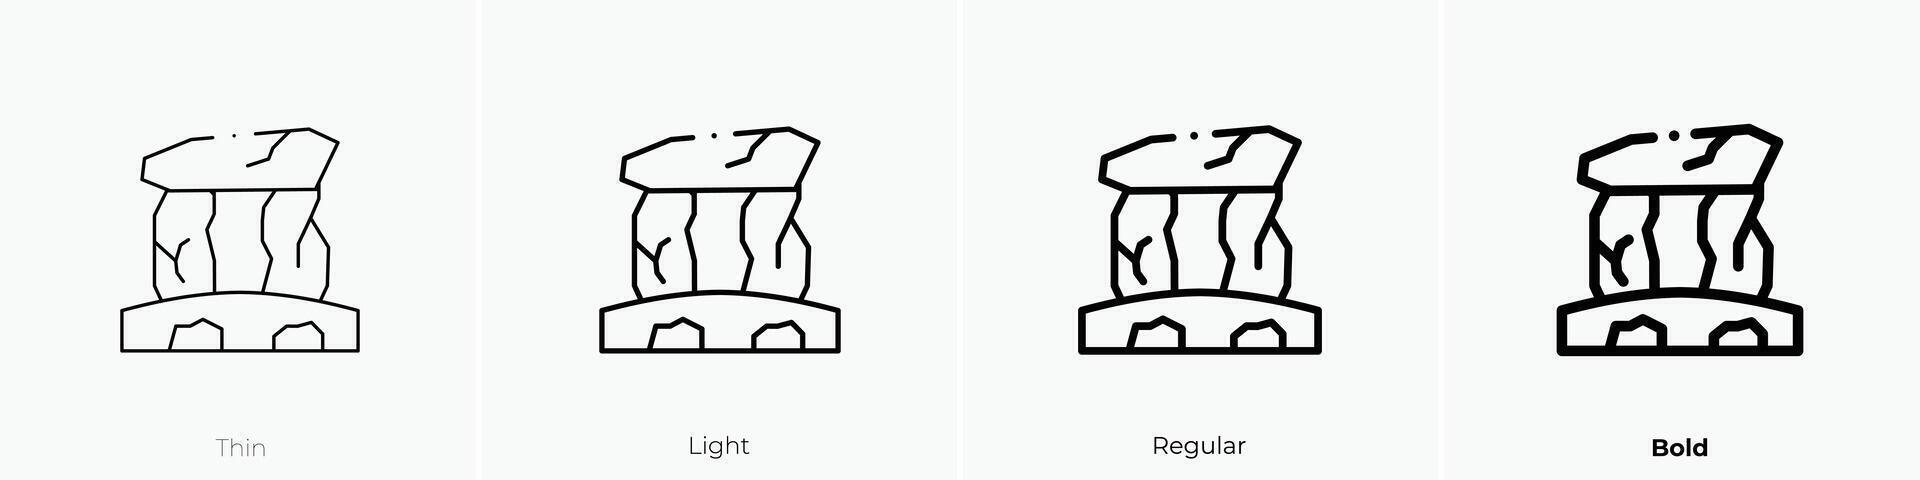 megalith icon. Thin, Light, Regular And Bold style design isolated on white background vector